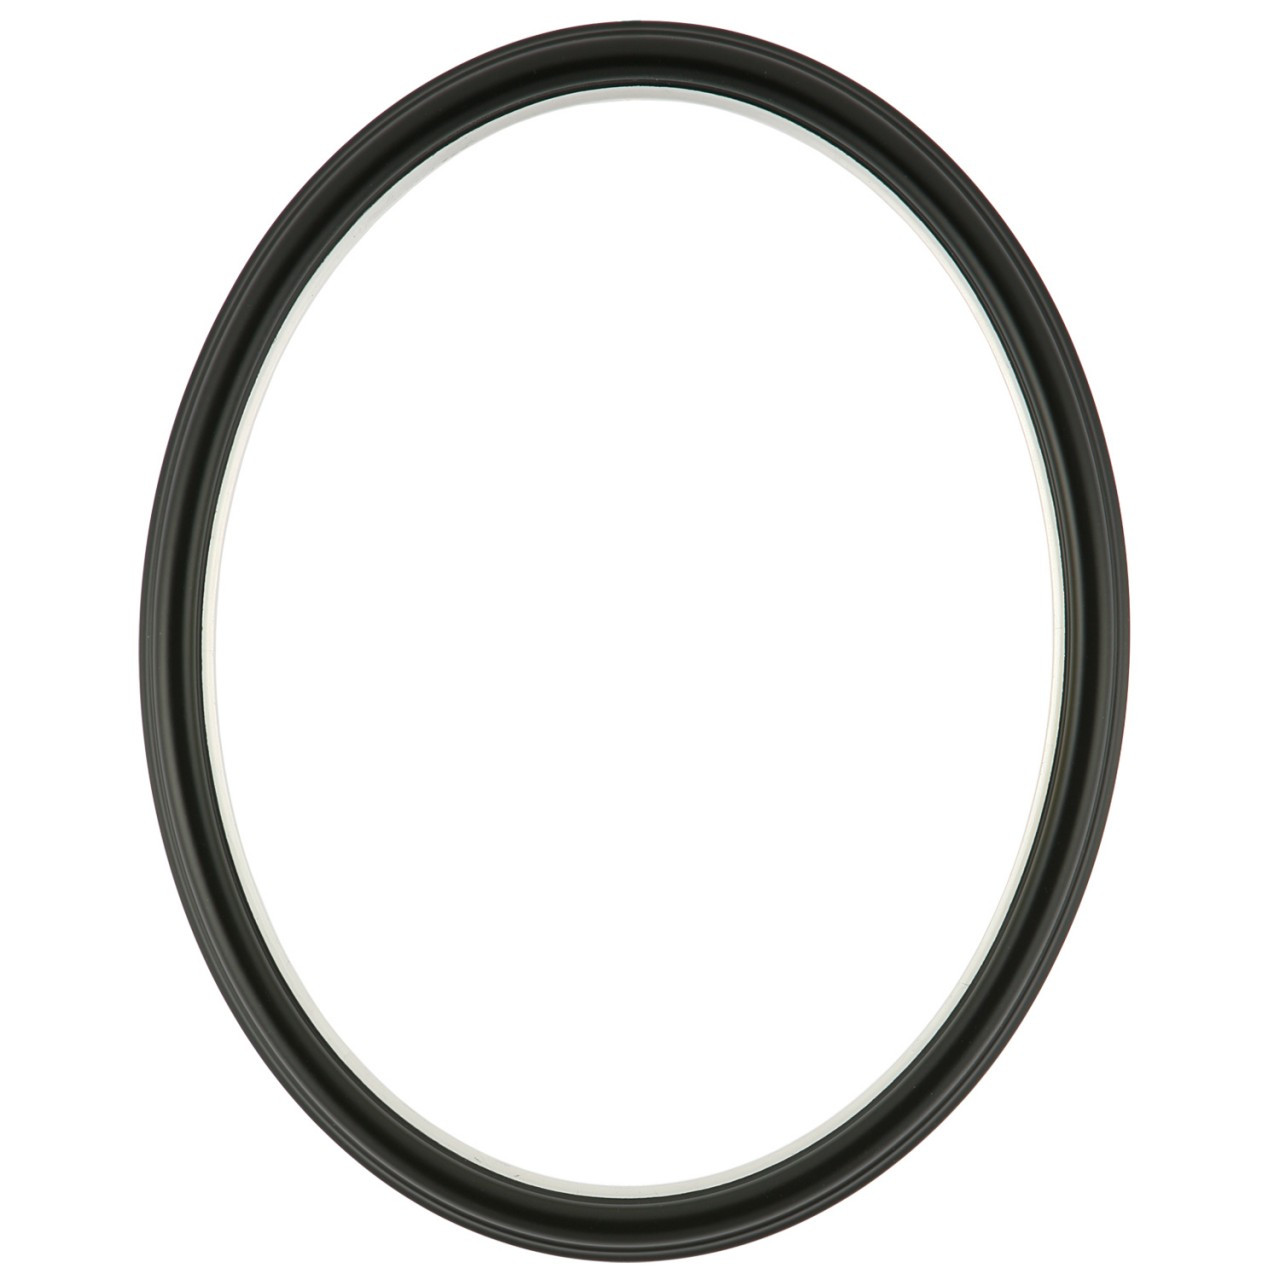 Oval Frame in Matte Black Finish with Silver Lip| Simple Black Wooden ...